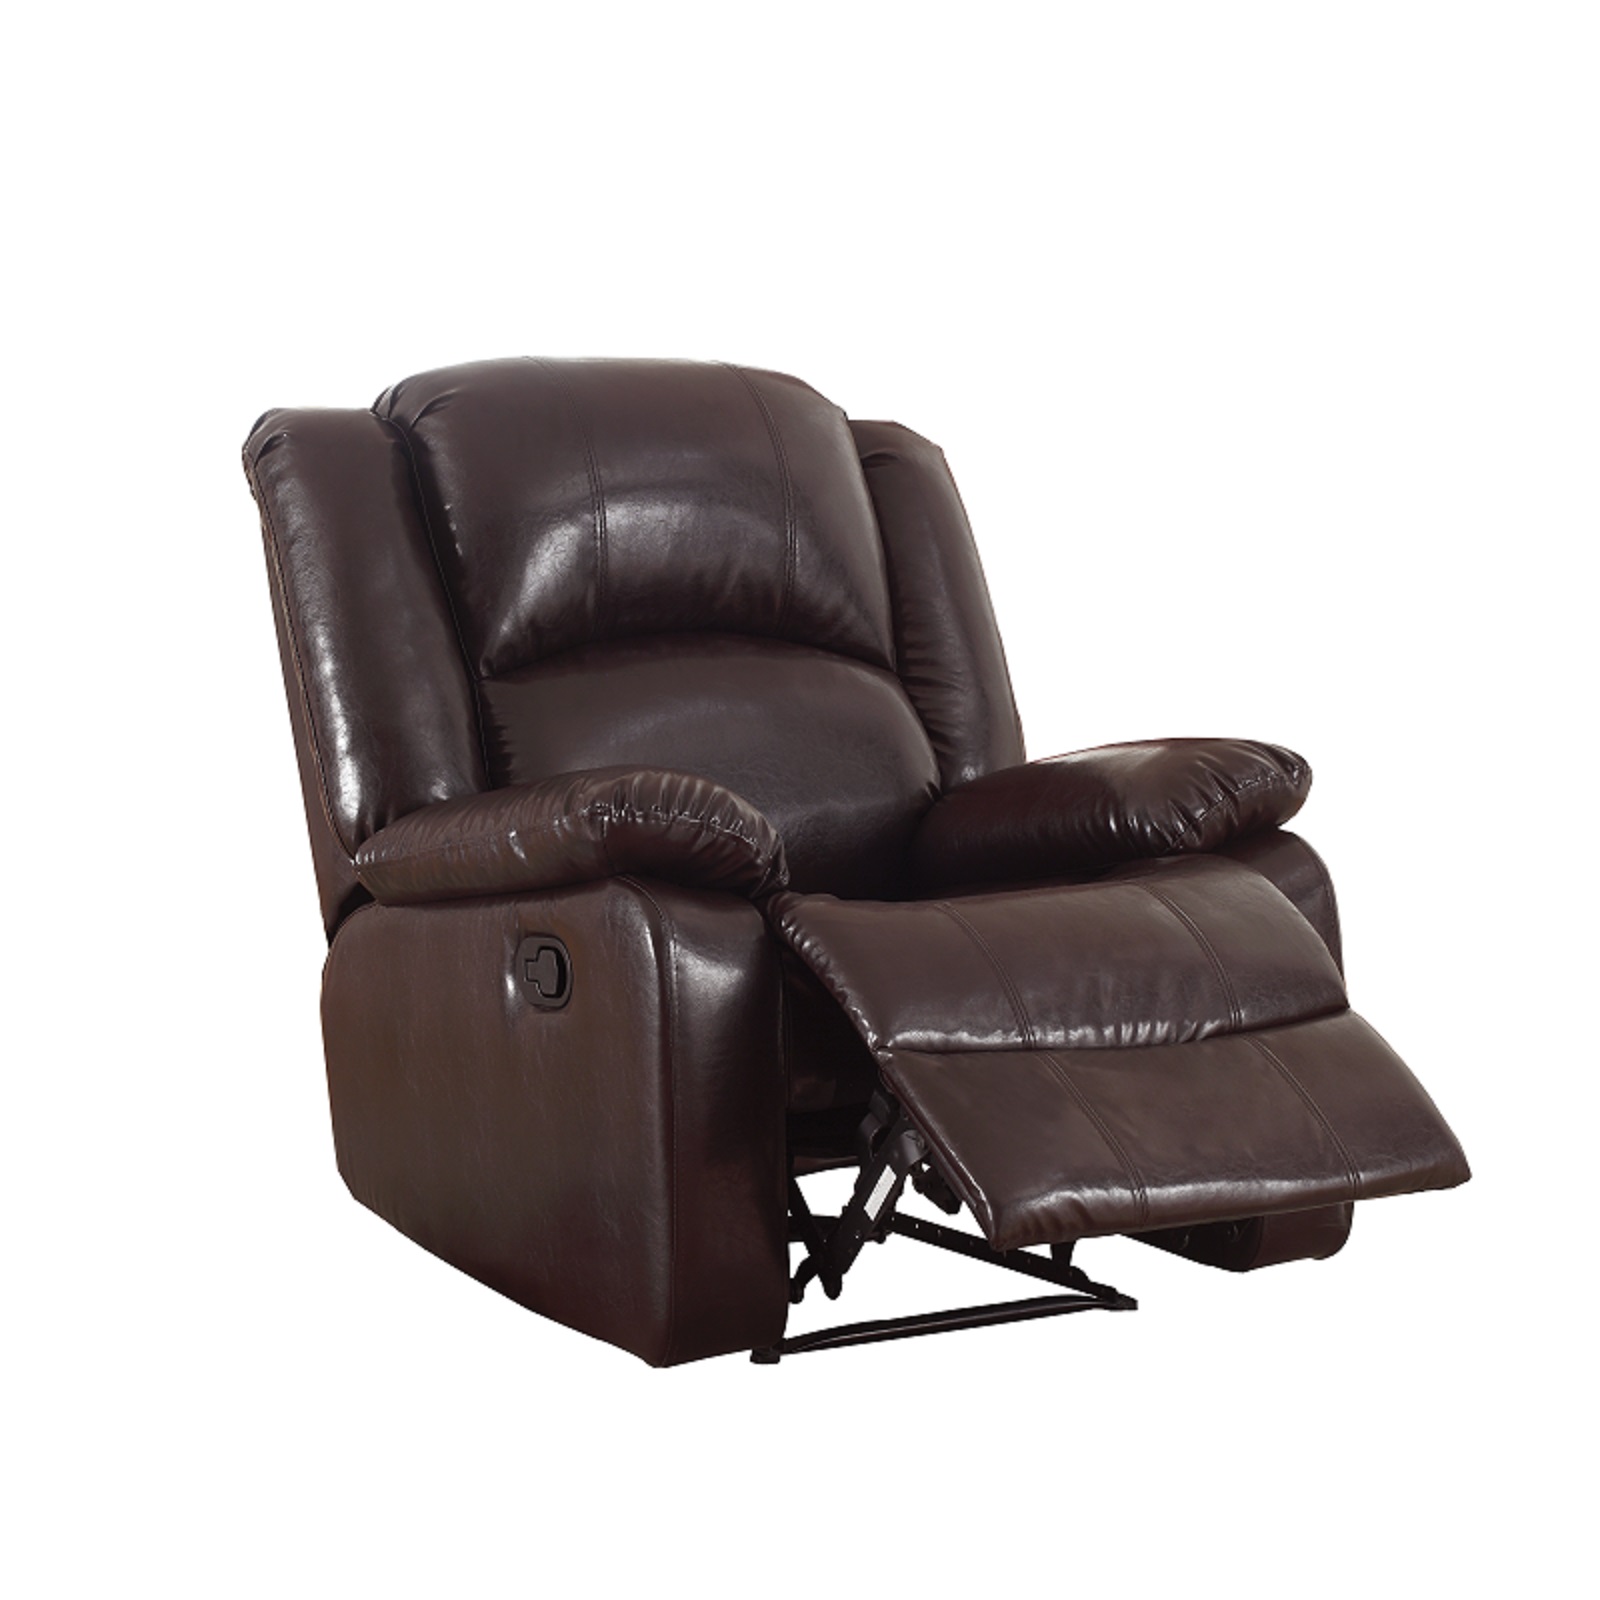 Leonel Signature Bonded Leather Glider Recliner, Multiple Colors - image 5 of 8